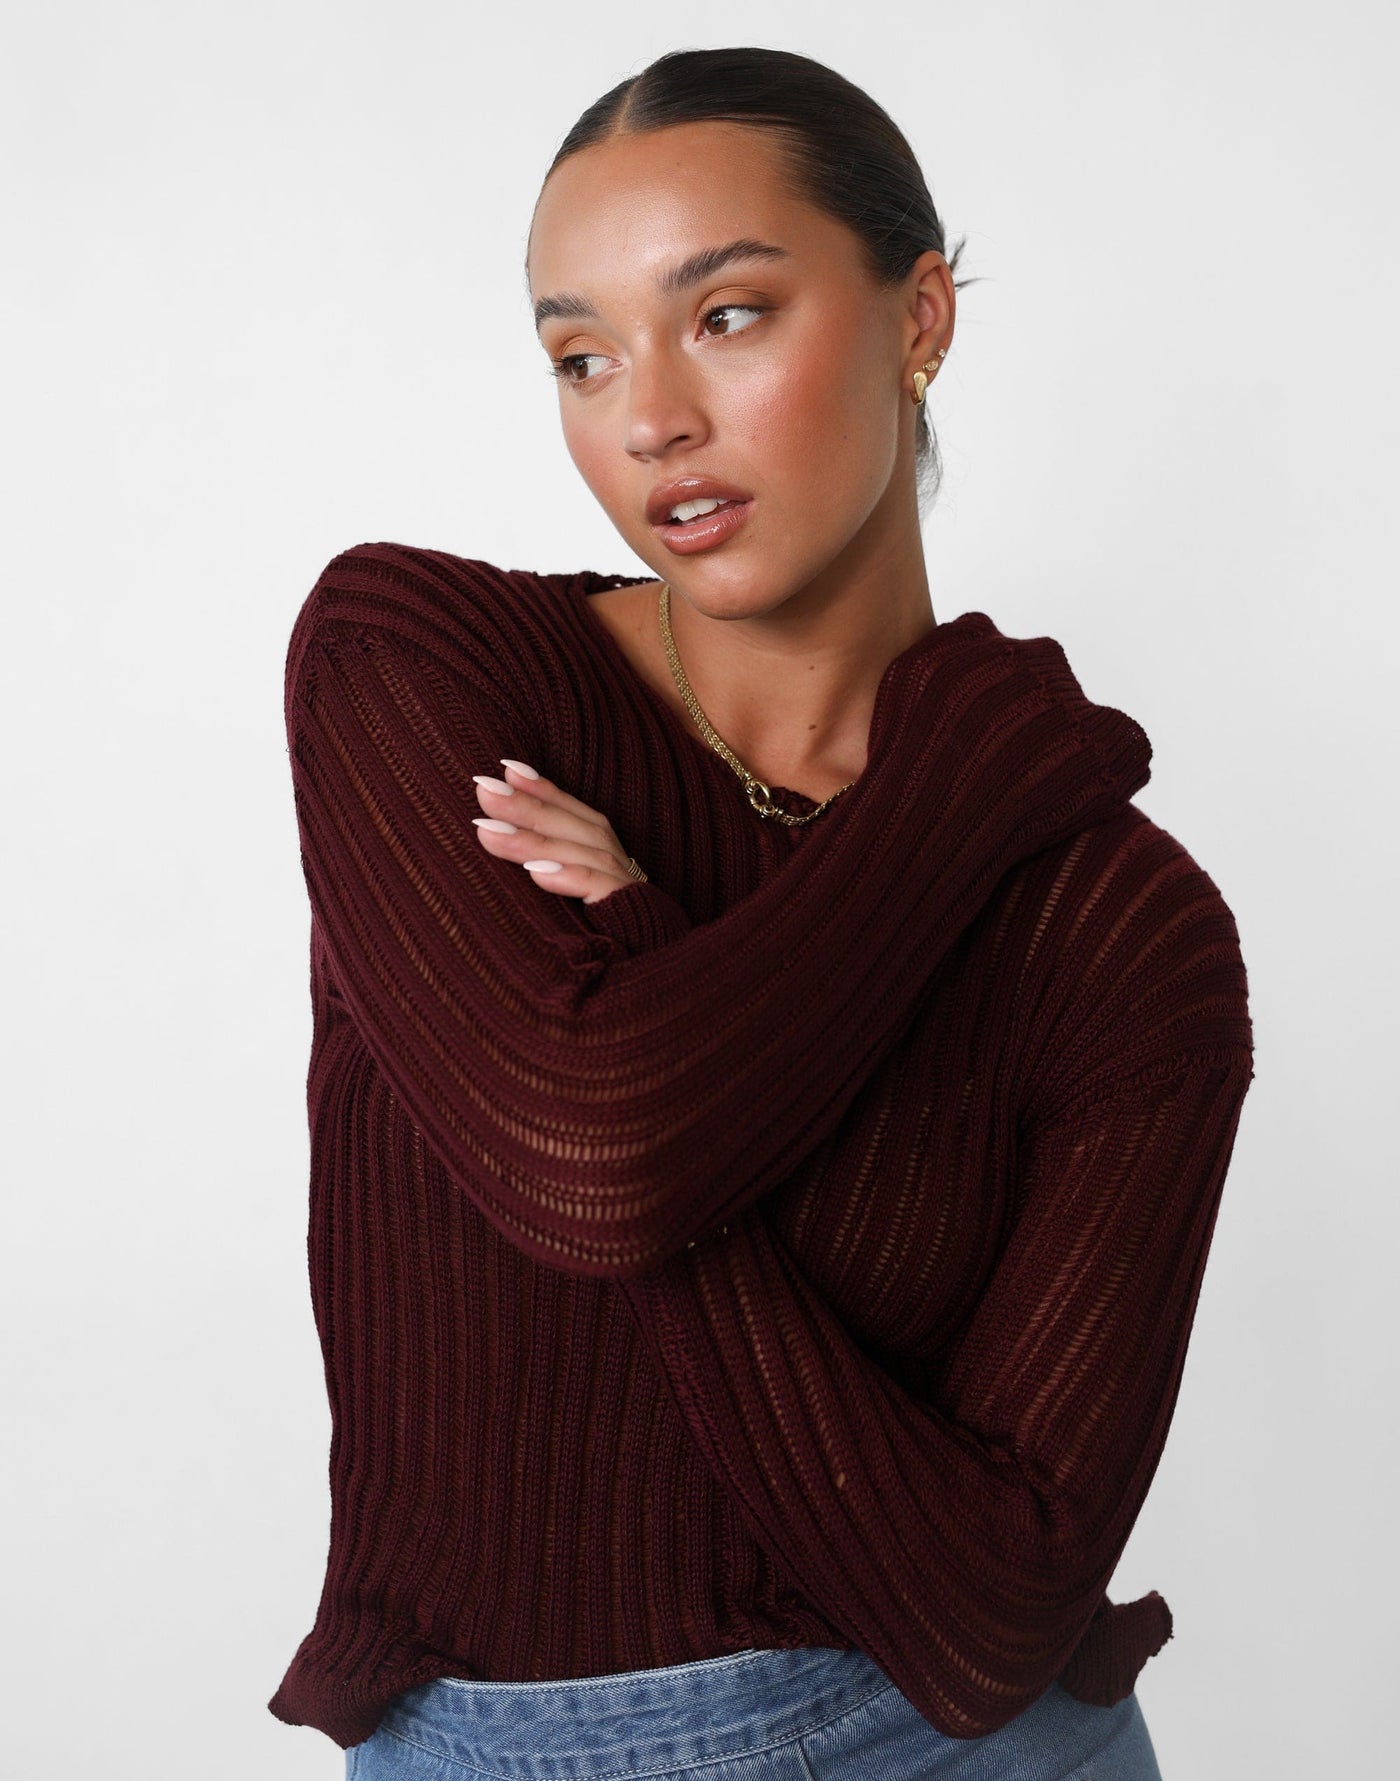 Ruby Long Sleeve Top (Plum) - Long Sleeve Knit Top - Women's Top - Charcoal Clothing